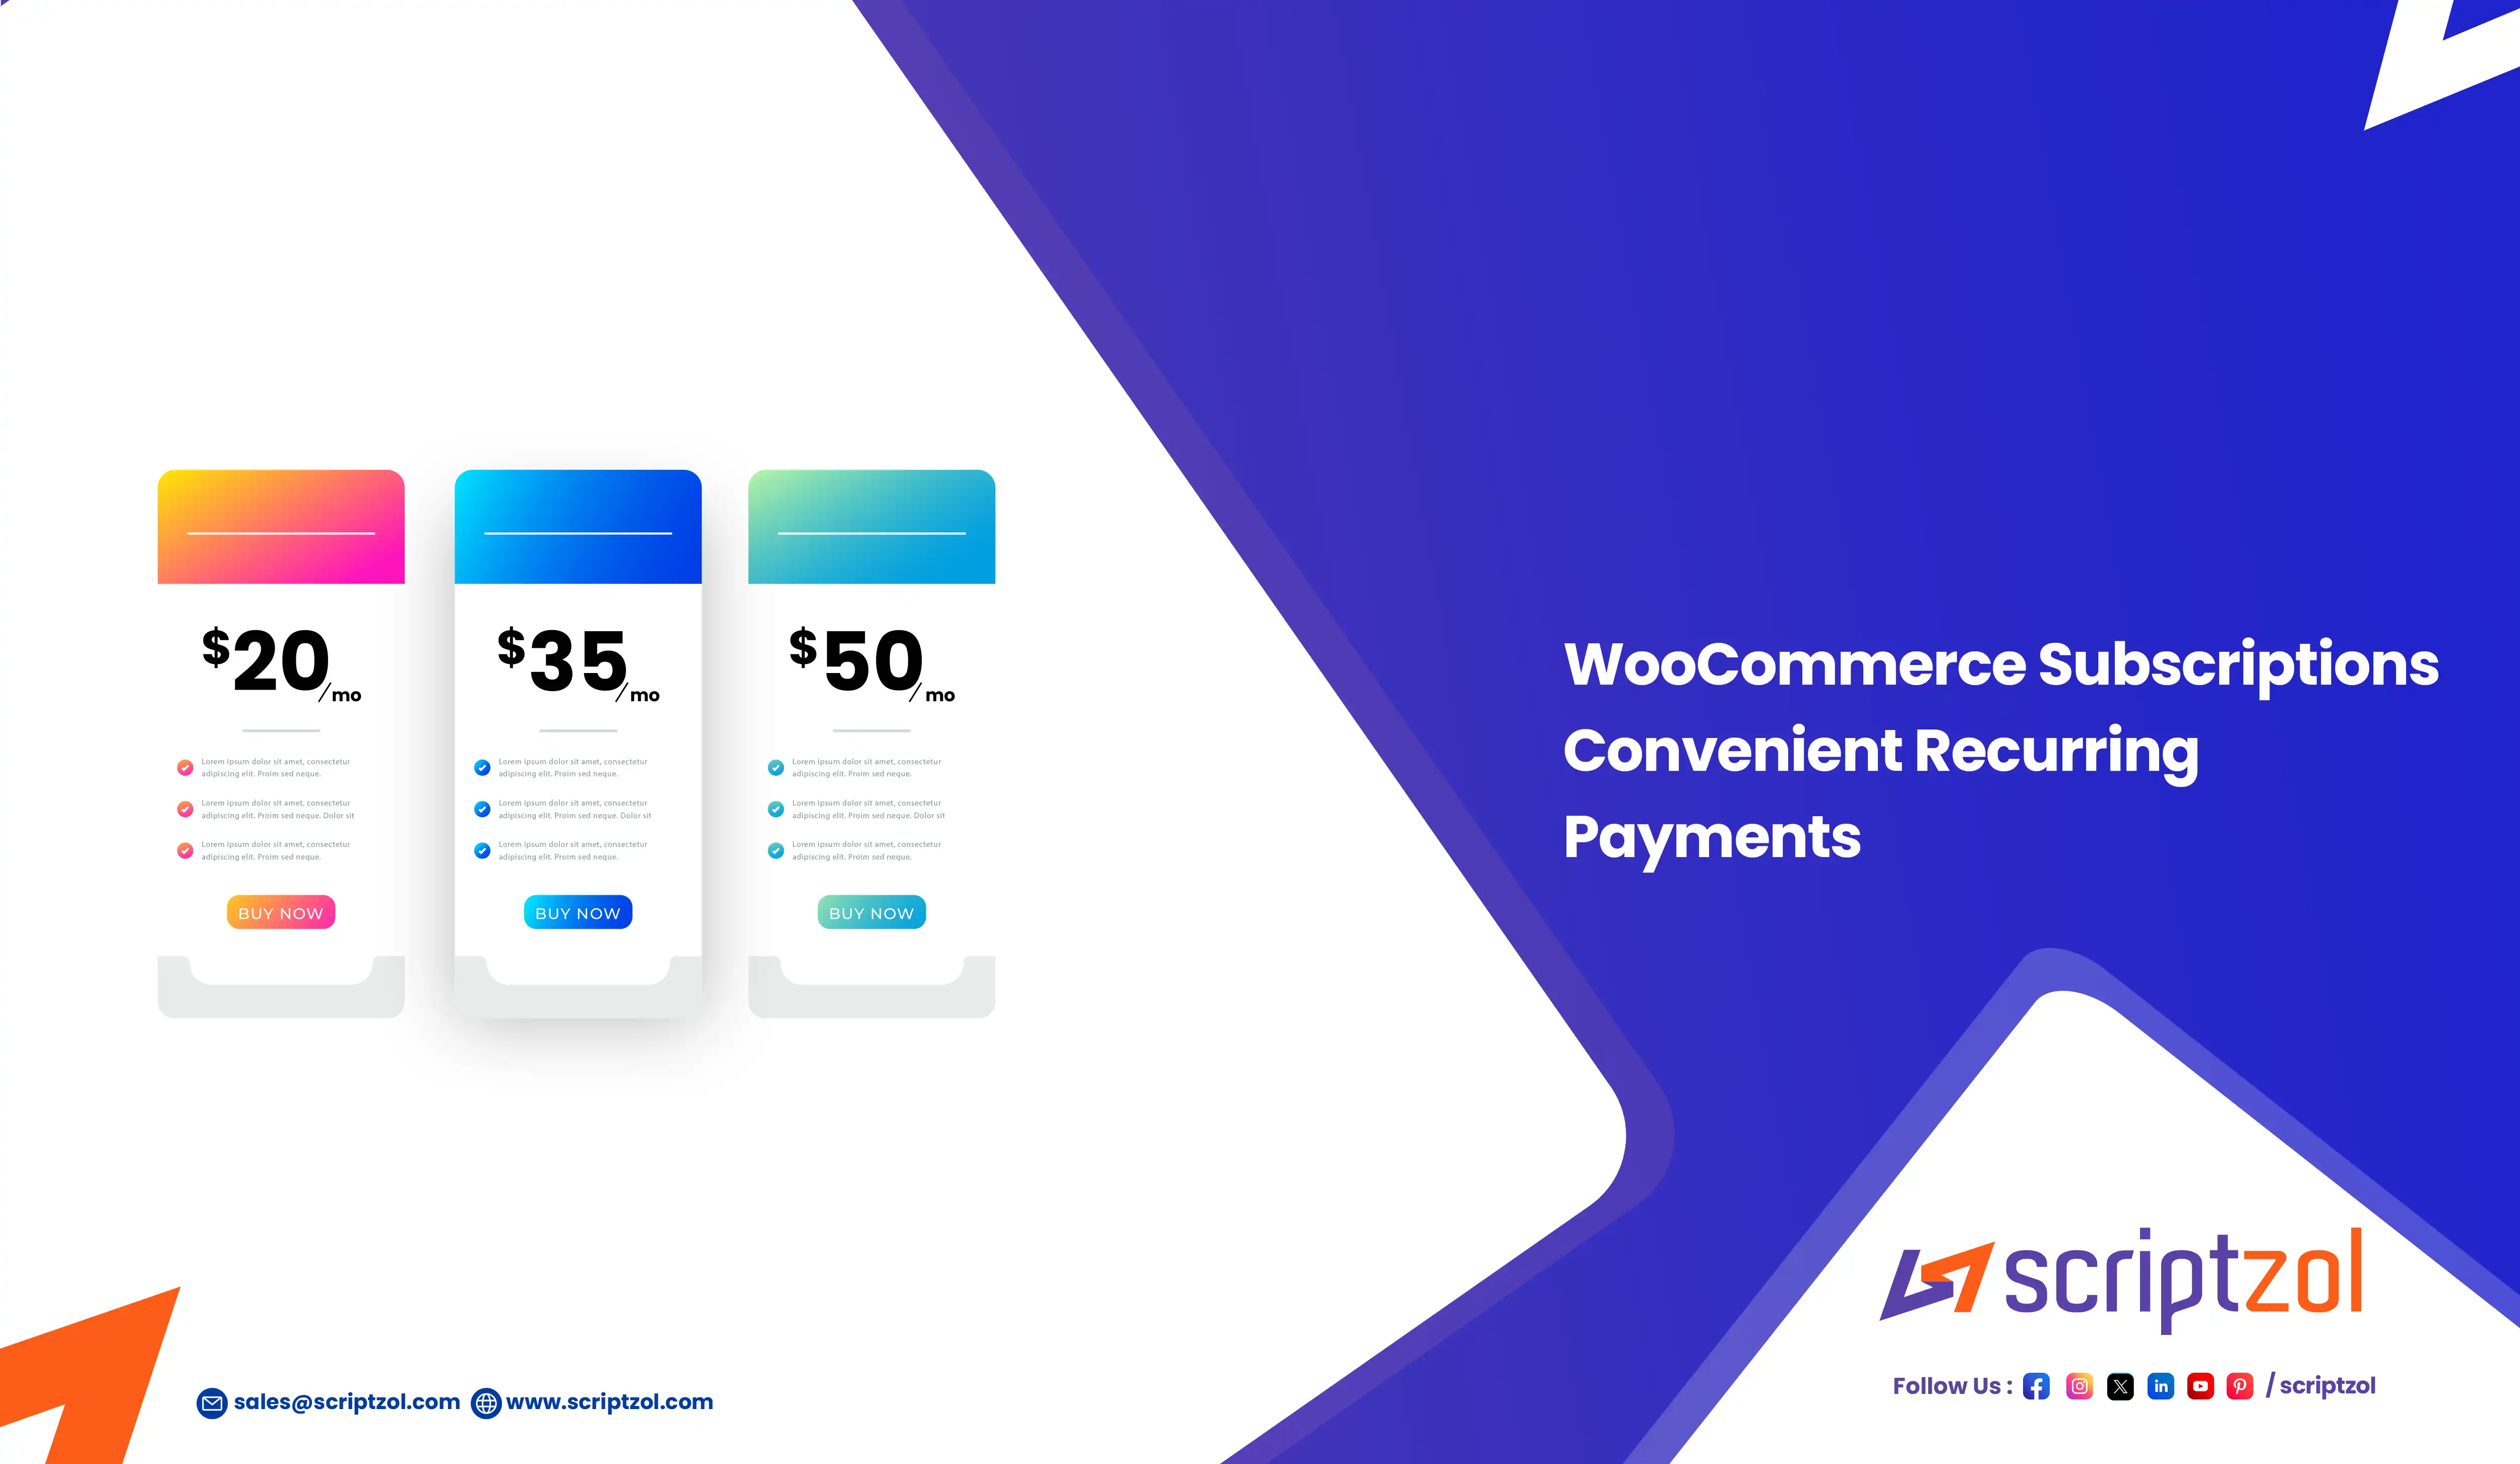 WooCommerce Subscriptions - Convenient Recurring Payments